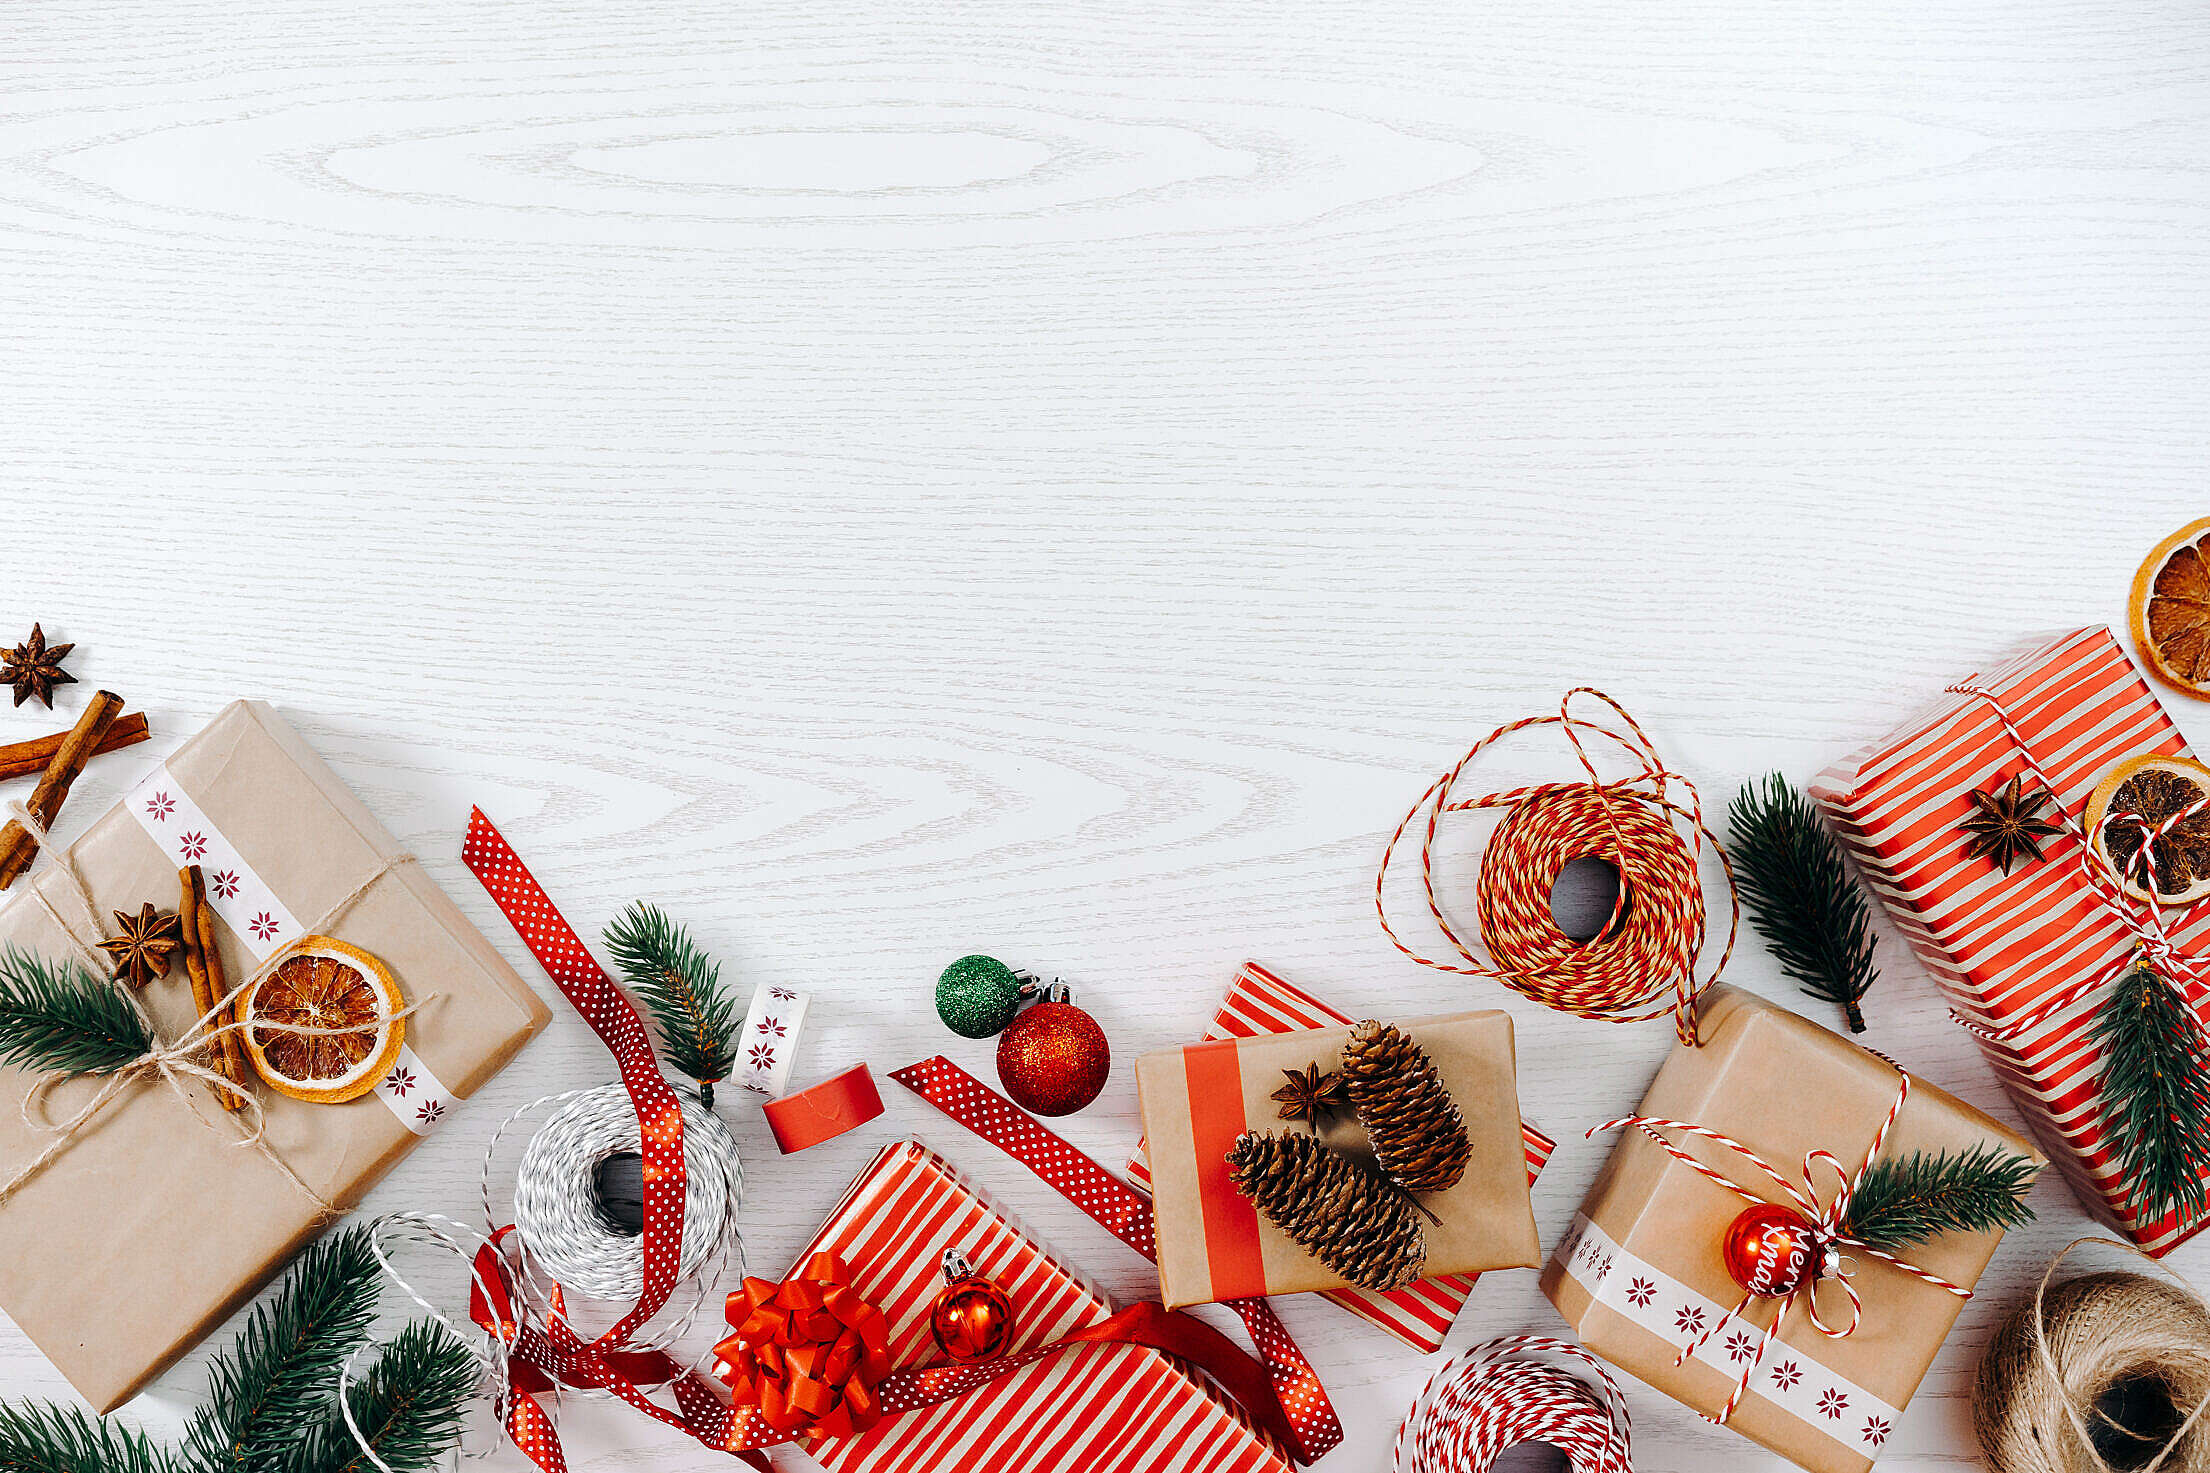 Christmas Presents Background for Text Free Stock Photo